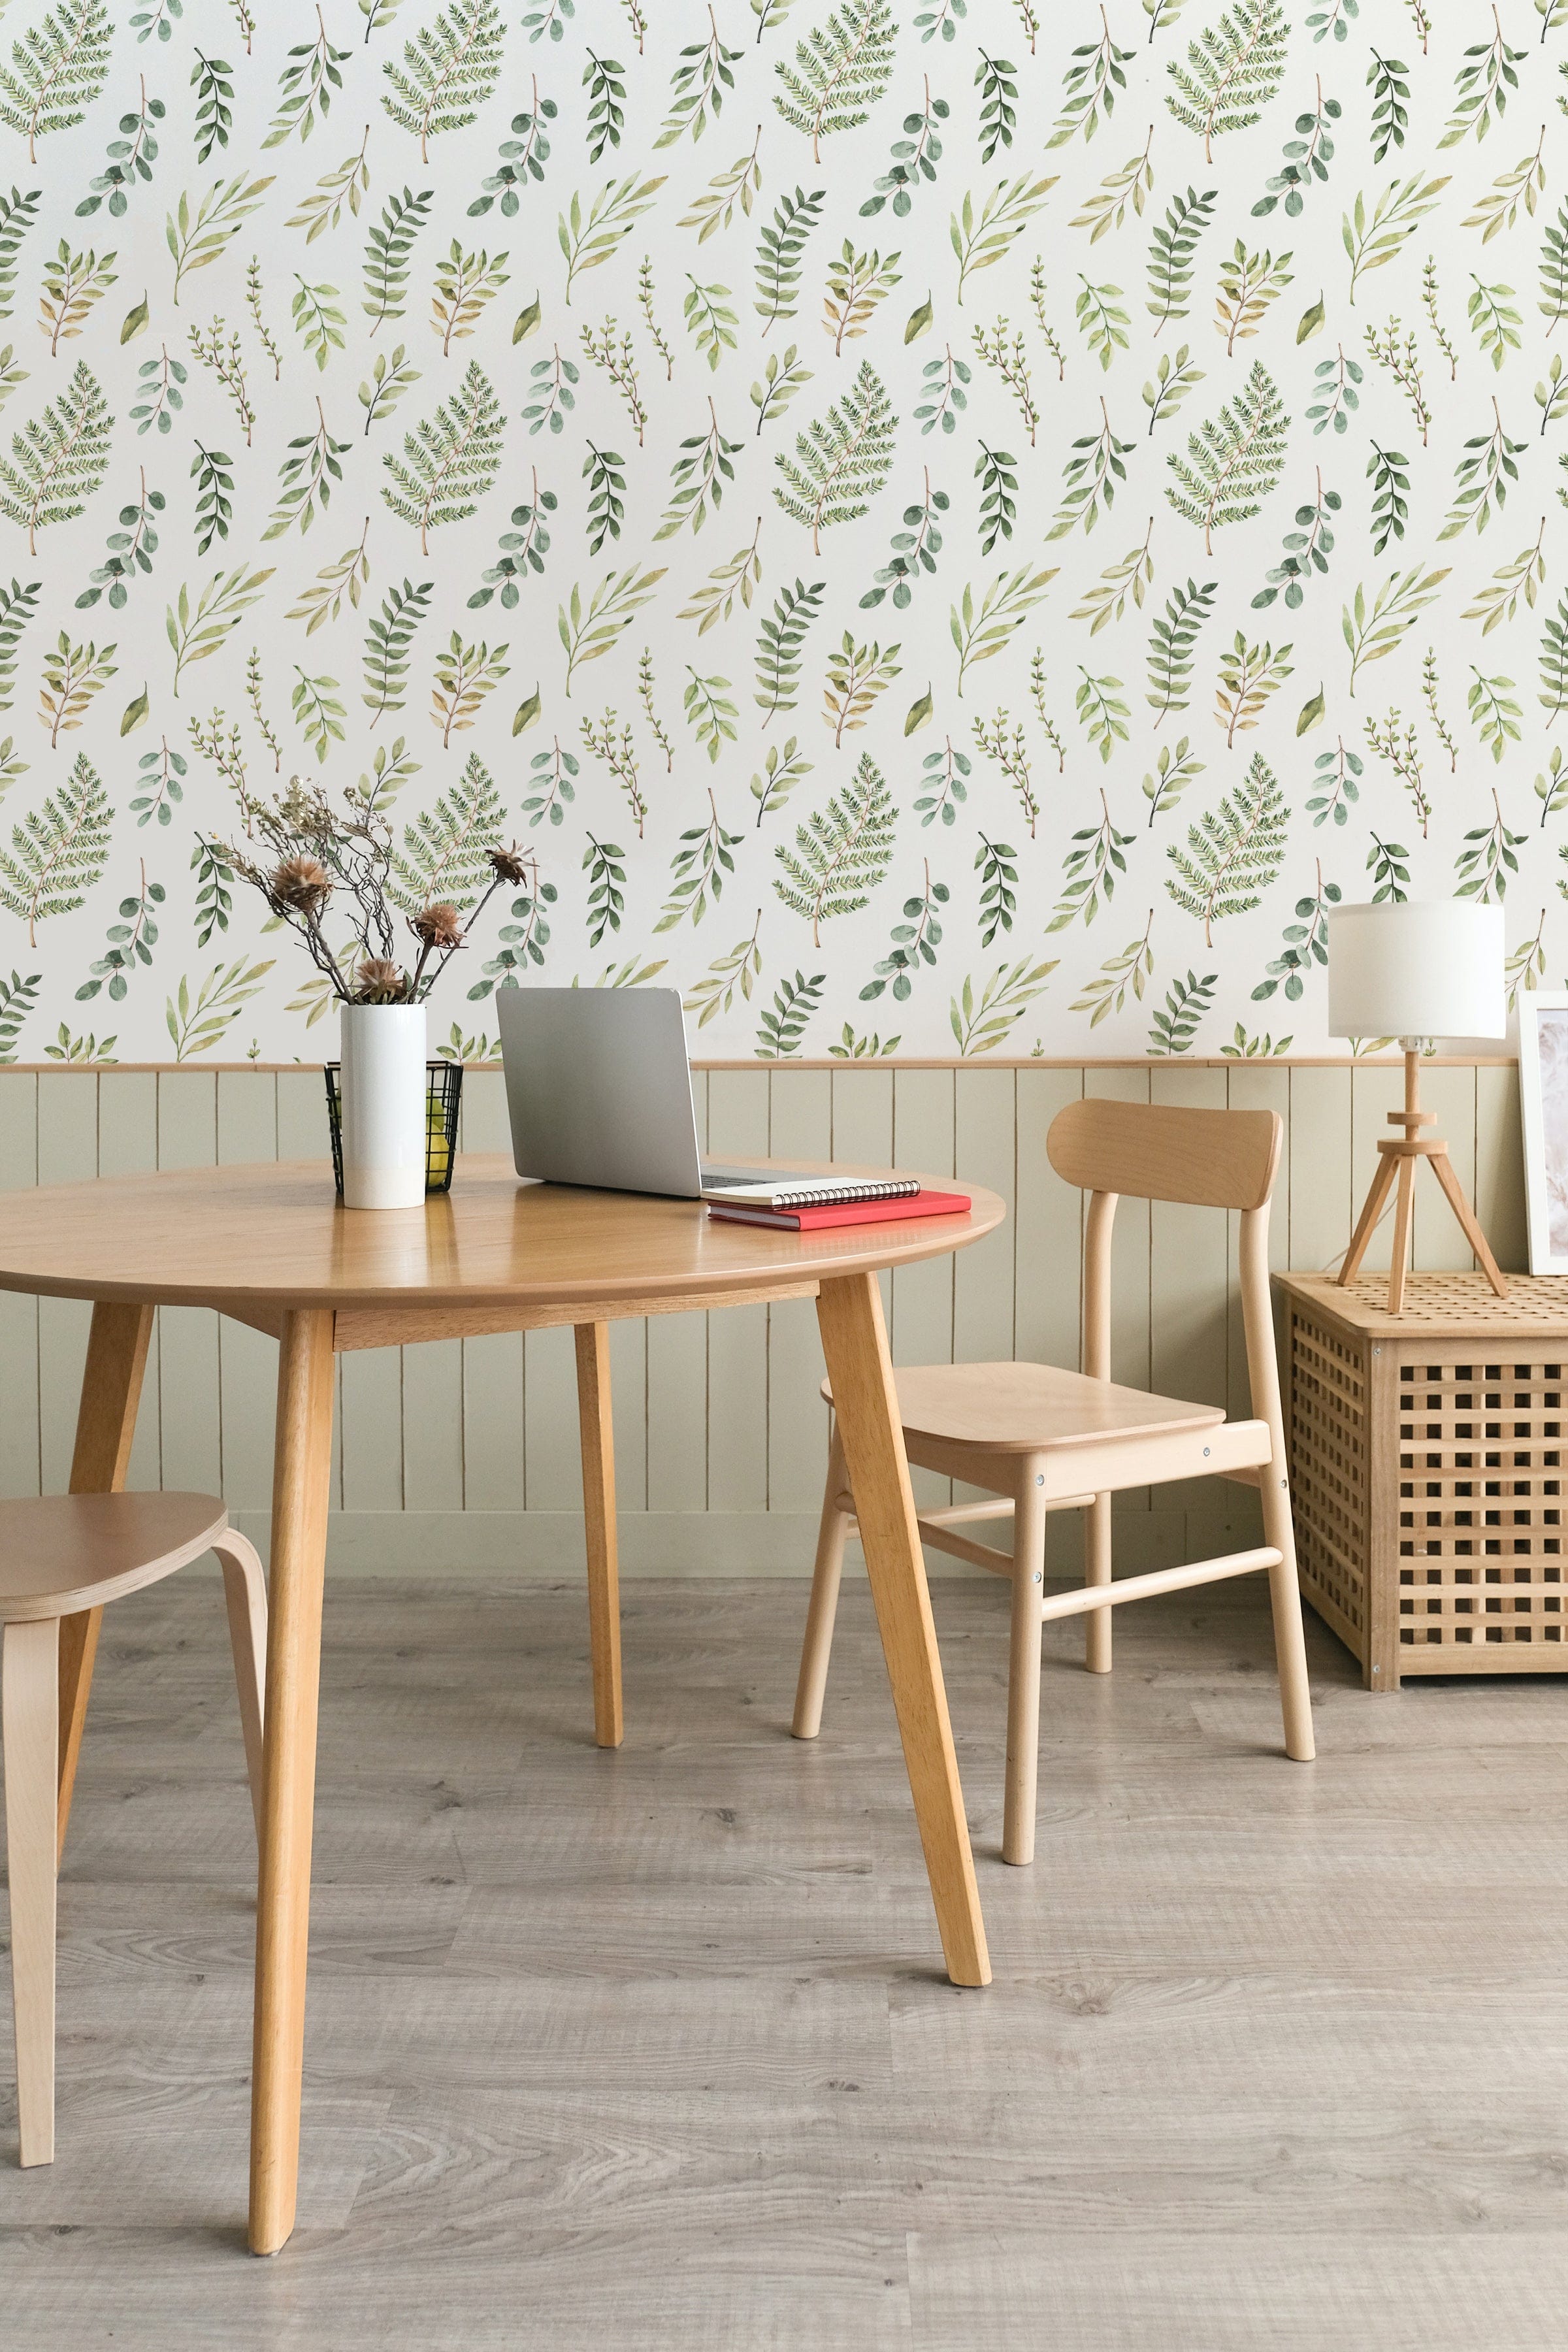 A cozy dining area with a wooden table and chairs, set against a wall decorated with Green Foliage Wallpaper, featuring hand-drawn green leaves and branches on a white background.